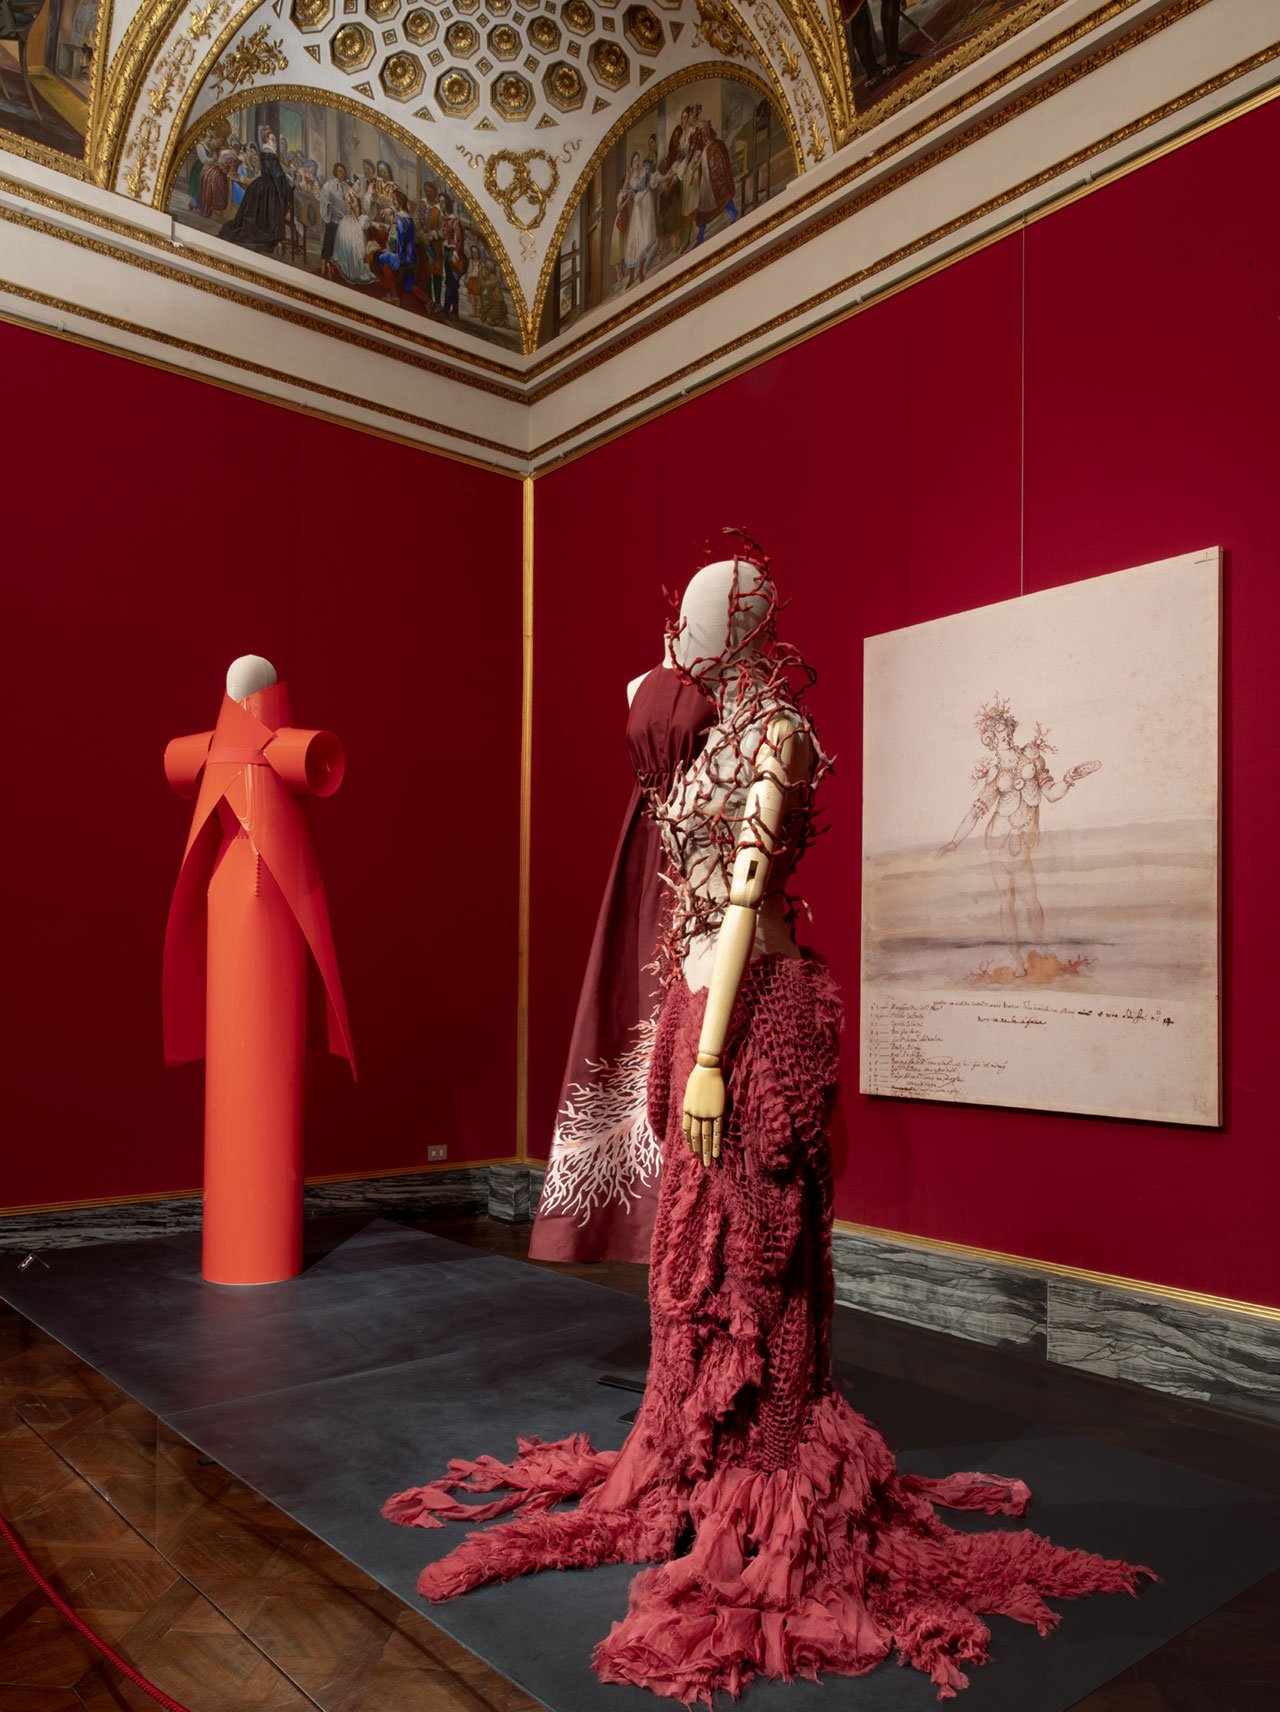 Exhibition view (from left to right):
Gareth Pugh, Dress, Spring/Summer 2018.
Valentino, Dress, Spring/Summer 2018.
Yiqin Yin, Dress “Calypso”, Les rives de Lunacy Collection. Fall/Winter 2013-14 Haute Couture.
Photo © Antonio Quattrone.